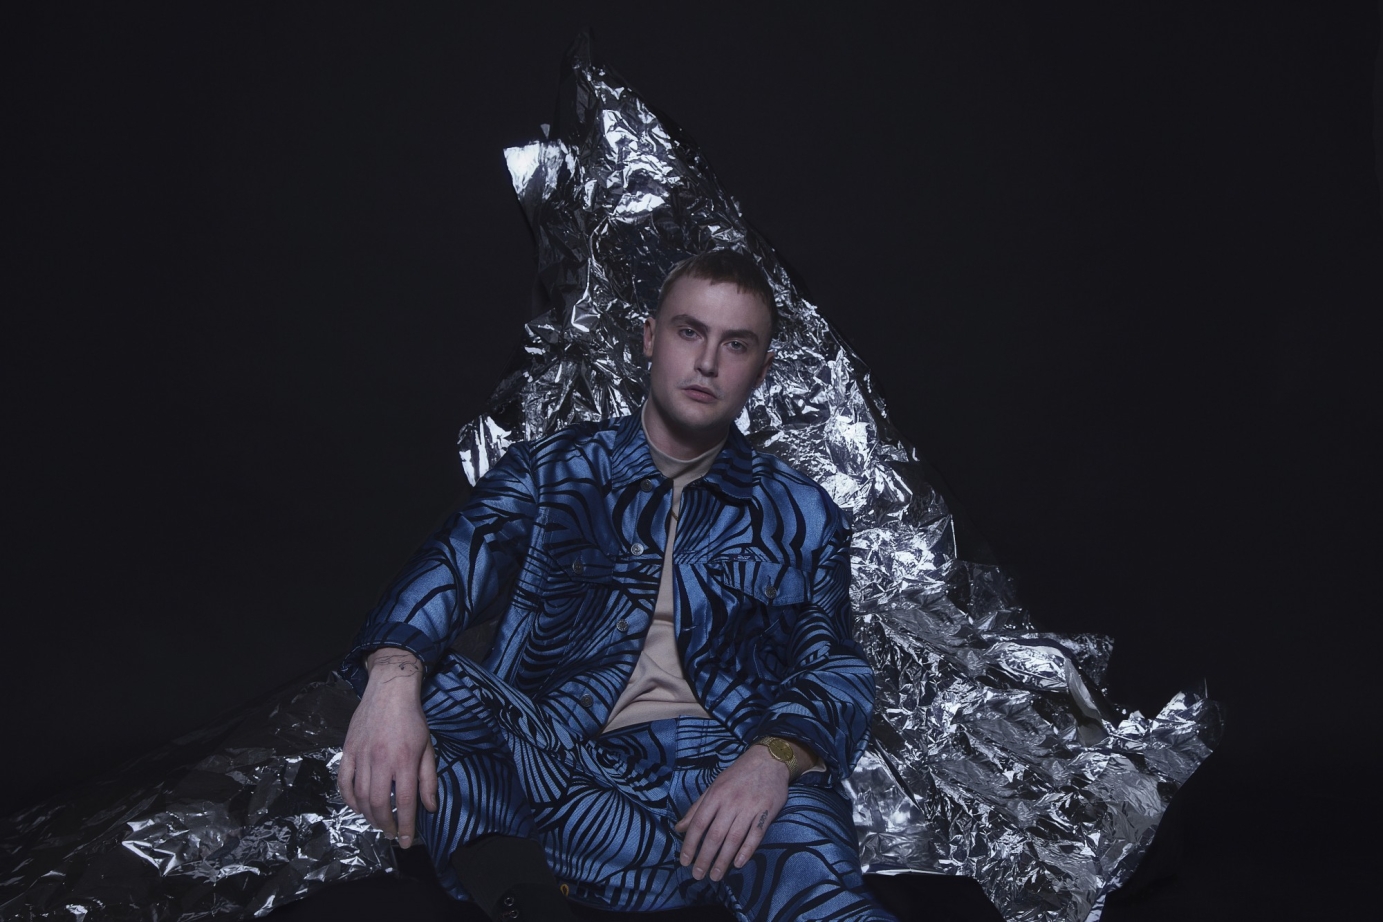 Press photo for Lapalux by Ozge Cone